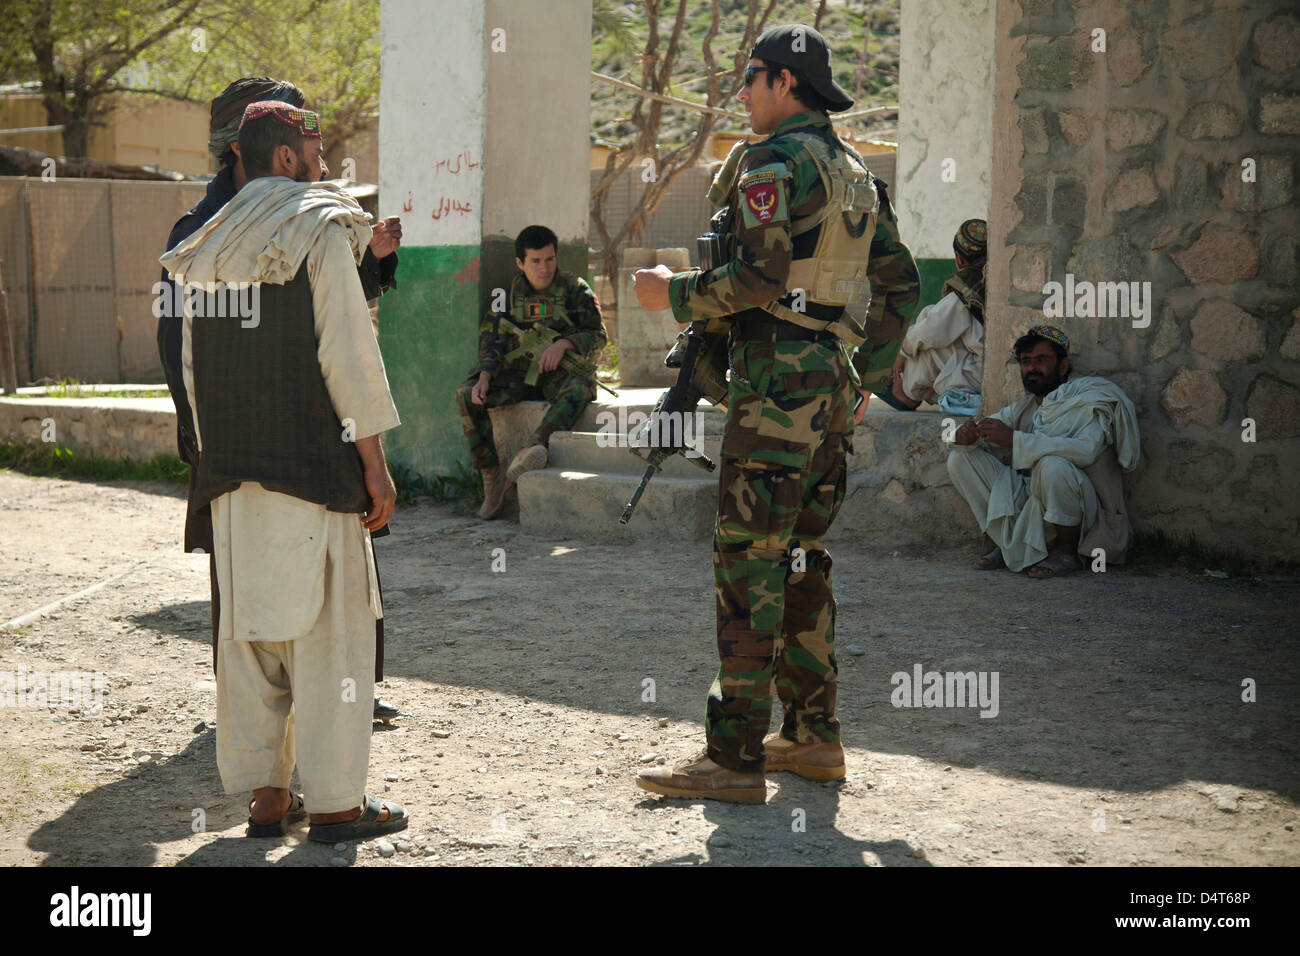 An Afghan National Army Special Forces speaks with Afghan Local Police candidates during a recruitment validation March 16, 2013 in Helmand province, Afghanistan. Stock Photo